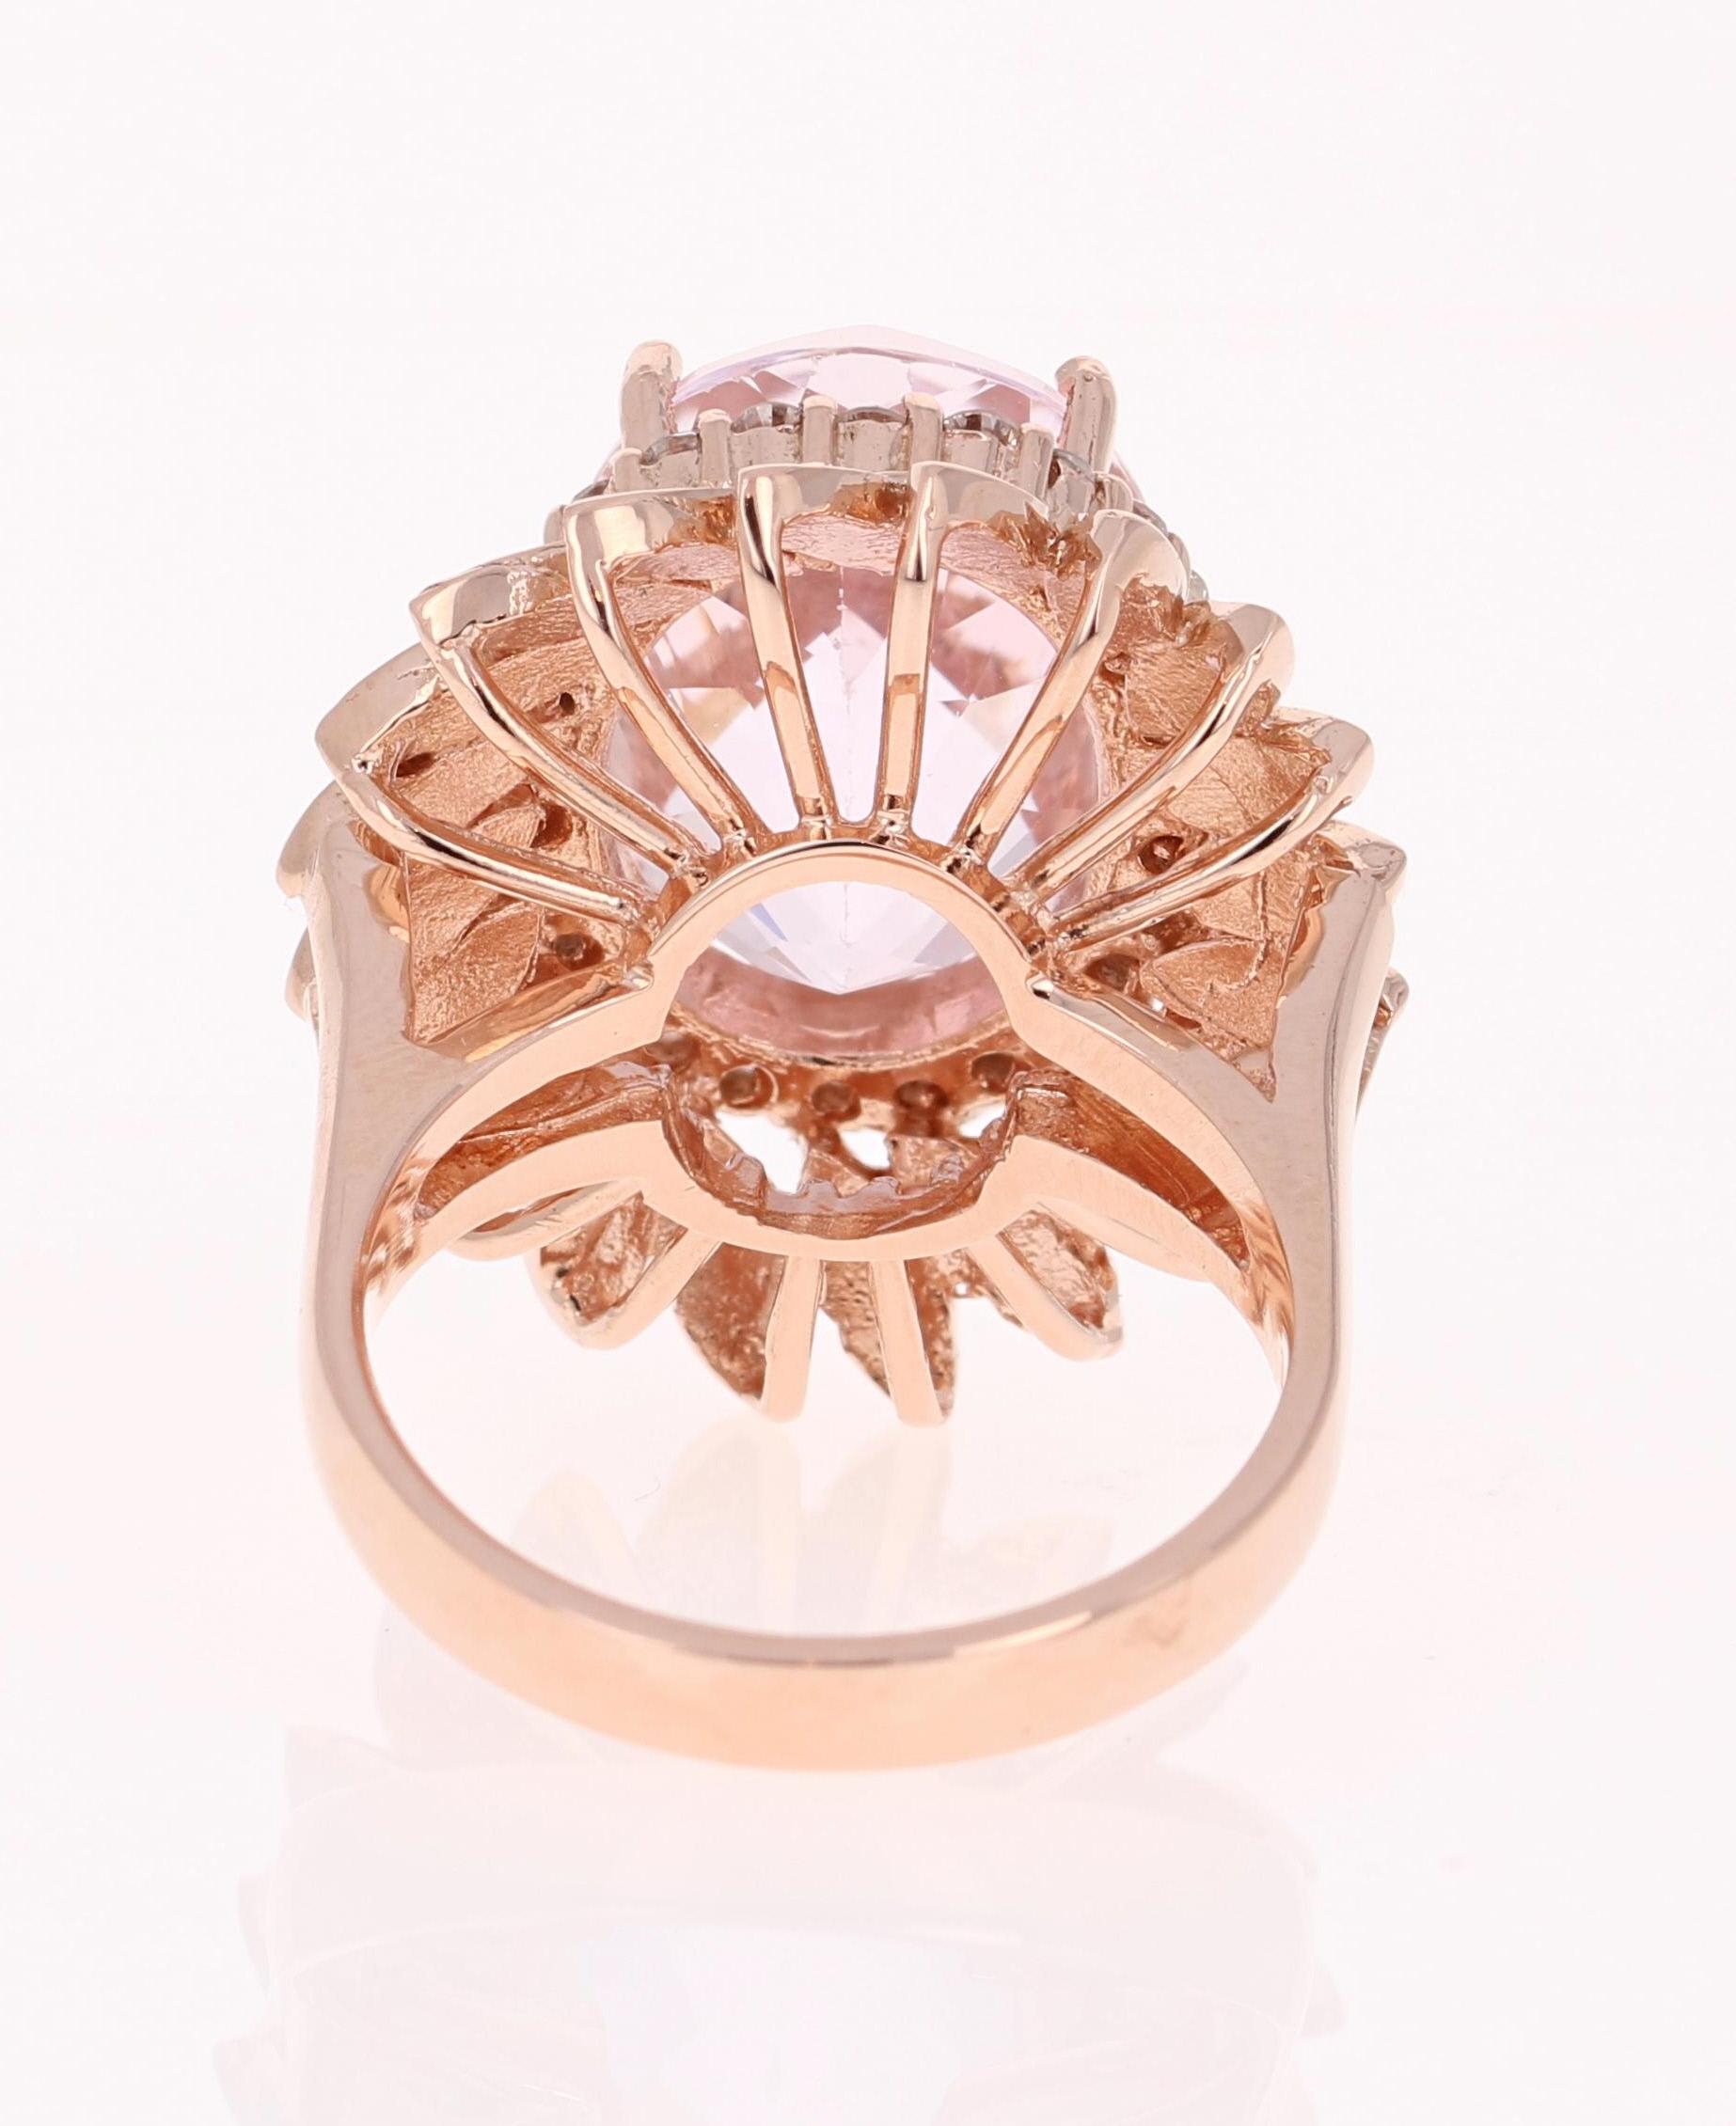 12.26 Carat Oval Cut Kunzite Diamond 14 Karat Rose Gold Cocktail Ring In New Condition For Sale In Los Angeles, CA